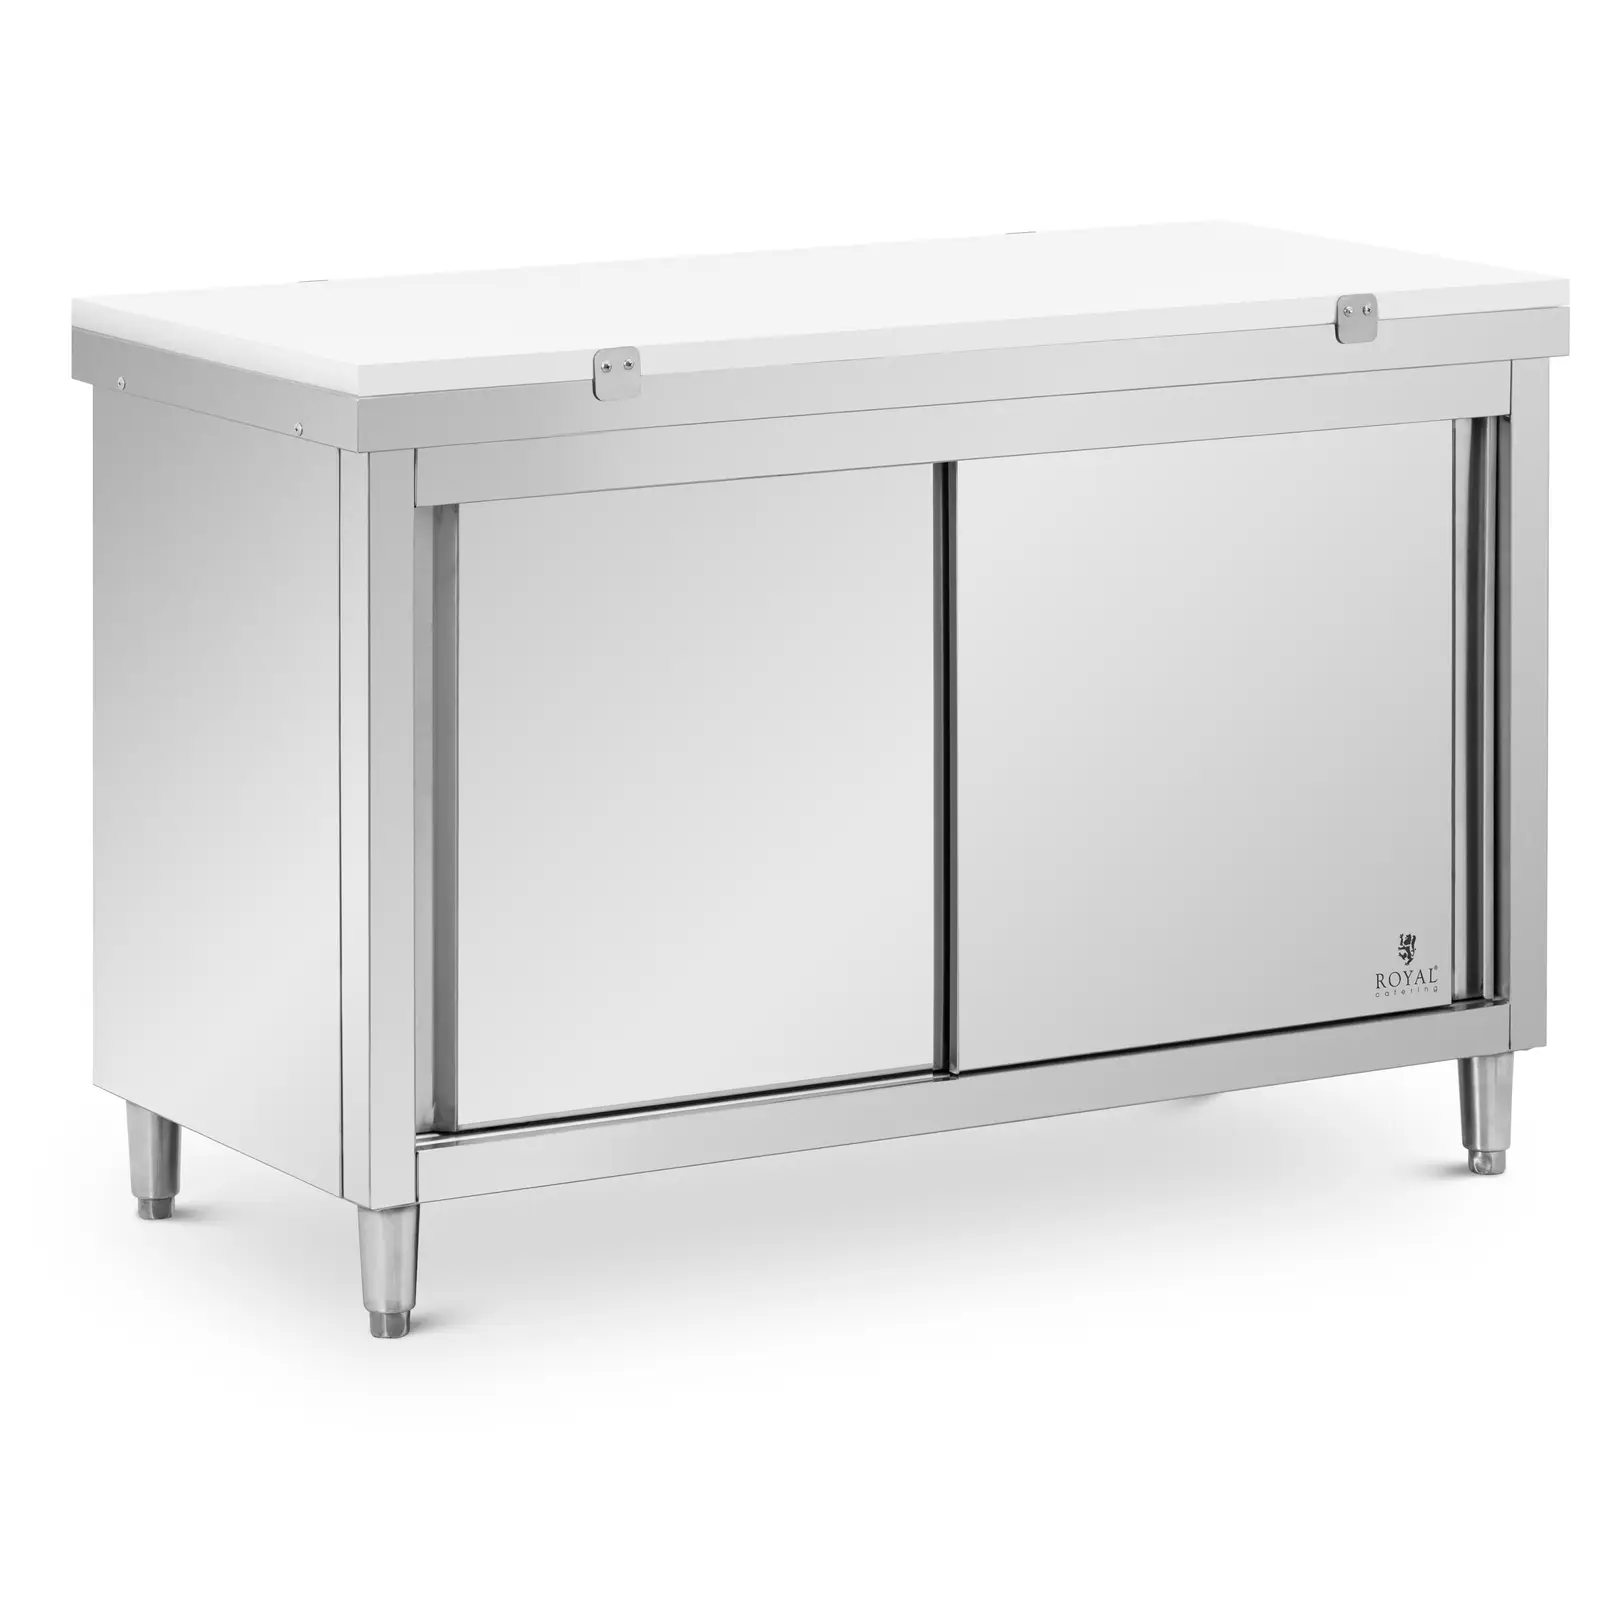 Stainless Steel Kitchen Prep Table - 140 x 60 cm - 500 kg load capacity - incl.  cutting board - Royal Catering